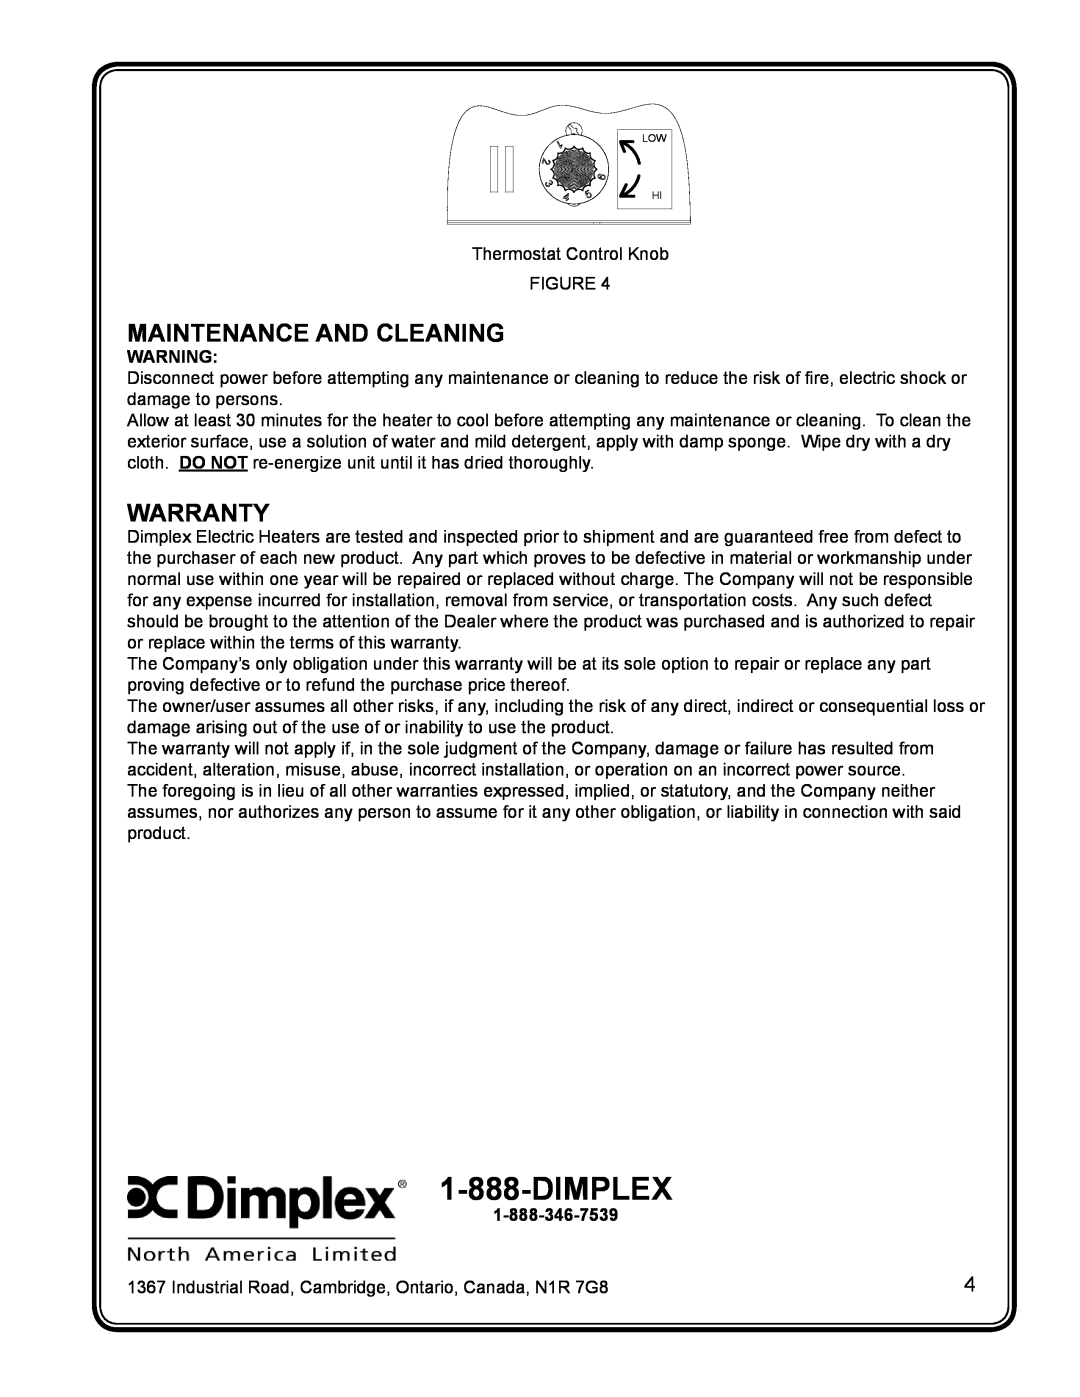 Dimplex CUH05B31T manual Dimplex, Maintenance And Cleaning, Warranty 